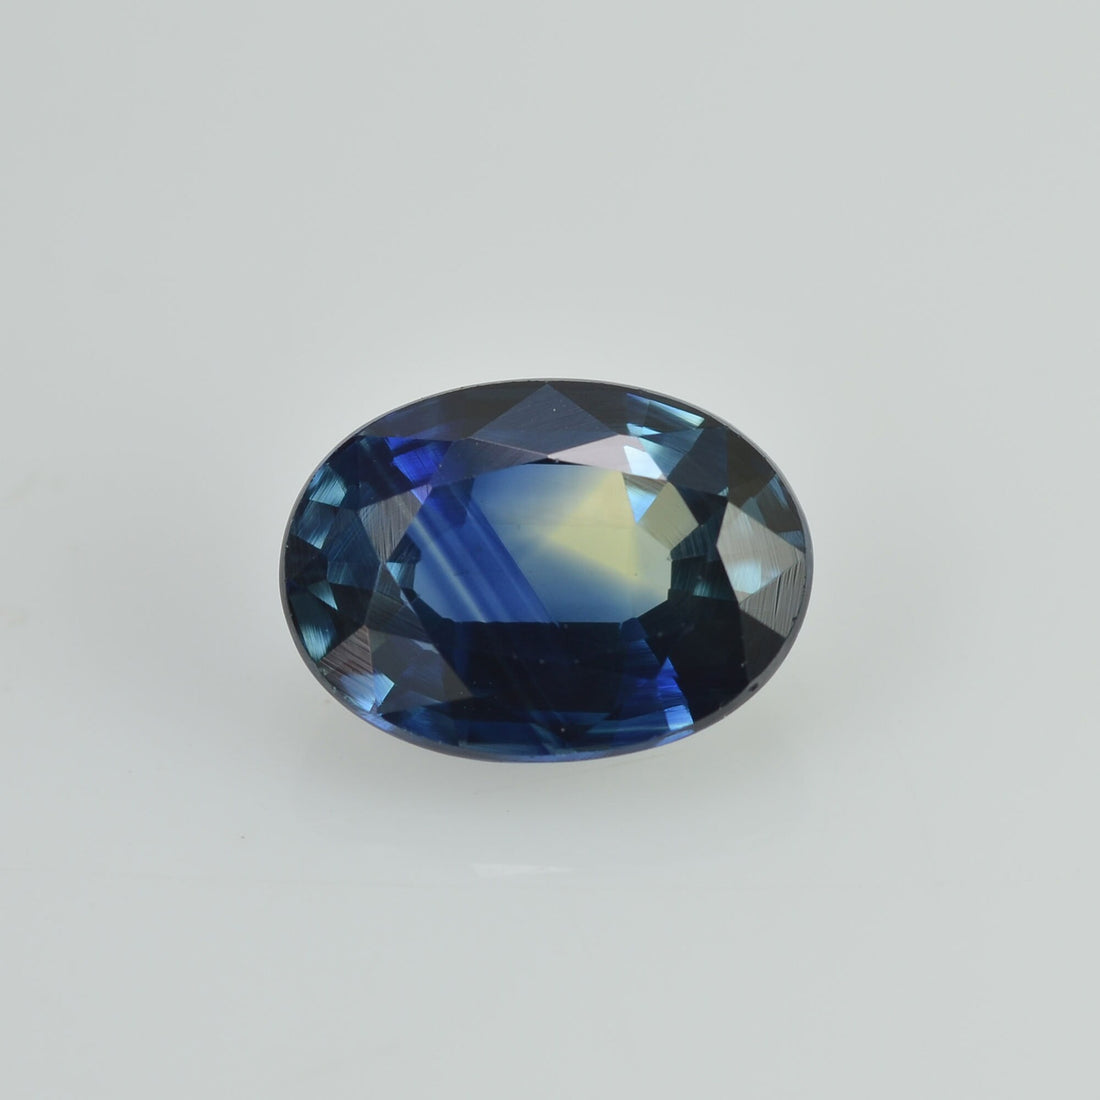 1.23 cts Natural Blue Green Teal Sapphire Loose Gemstone Oval Cut